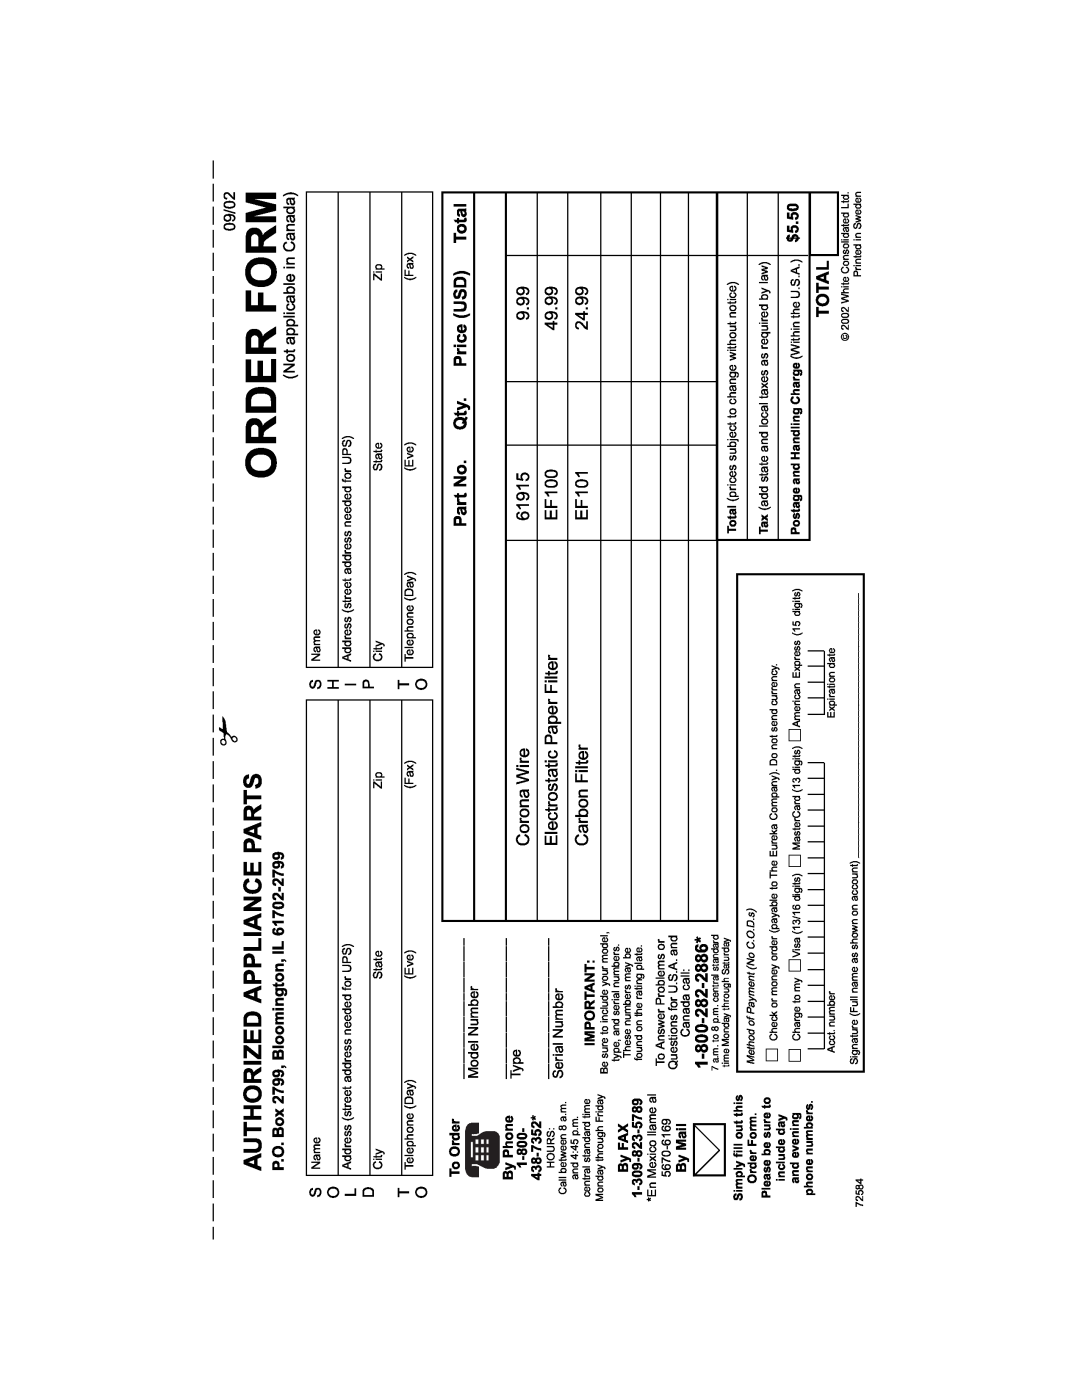 Electrolux Z7040 Order Form, Authorized Appliance Parts, Corona Wire, 61915, 9.99, Electrostatic Paper Filter, EF100, Type 